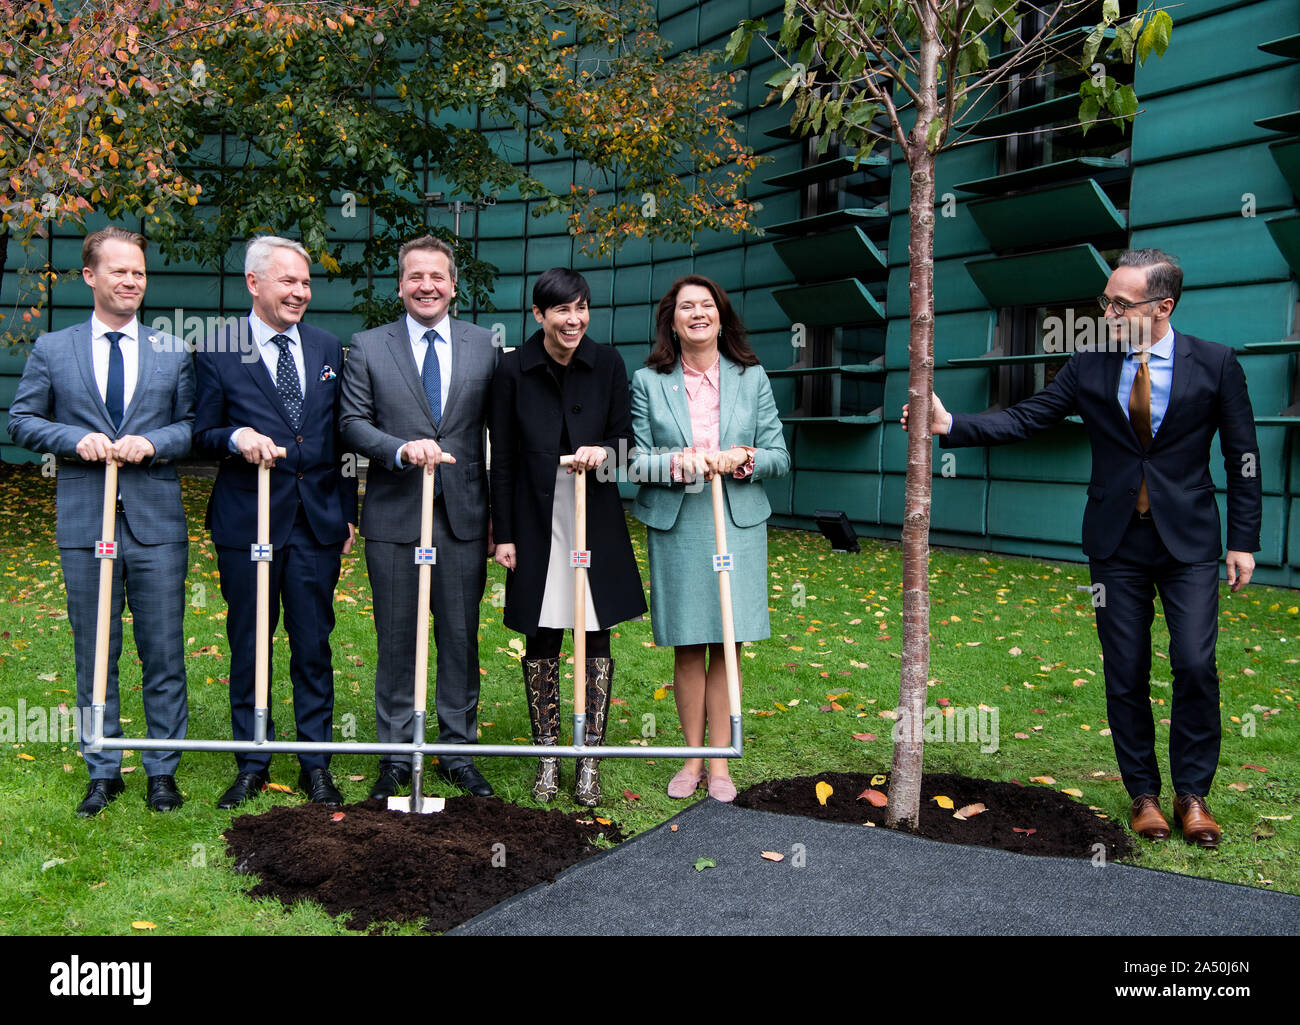 17 October 2019, Berlin: Heiko Maas (r, SPD), Foreign Minister, is symbolically planting a tree at the 20th anniversary celebrations of the Nordic Embassies in Berlin together with the Foreign Ministers of the Nordic countries (l-r), Jeppe Kofod (Denmark), Pekka Haavisto (Finland), Gudlaugur Thor Thordarson (Iceland), Ine Marie Eriksen Søreide (Norway) and Ann Linde (Sweden). On 20.10.1999 the common embassy complex of the five Nordic countries was inaugurated in Berlin-Tiergarten. Photo: Bernd von Jutrczenka/dpa Stock Photo